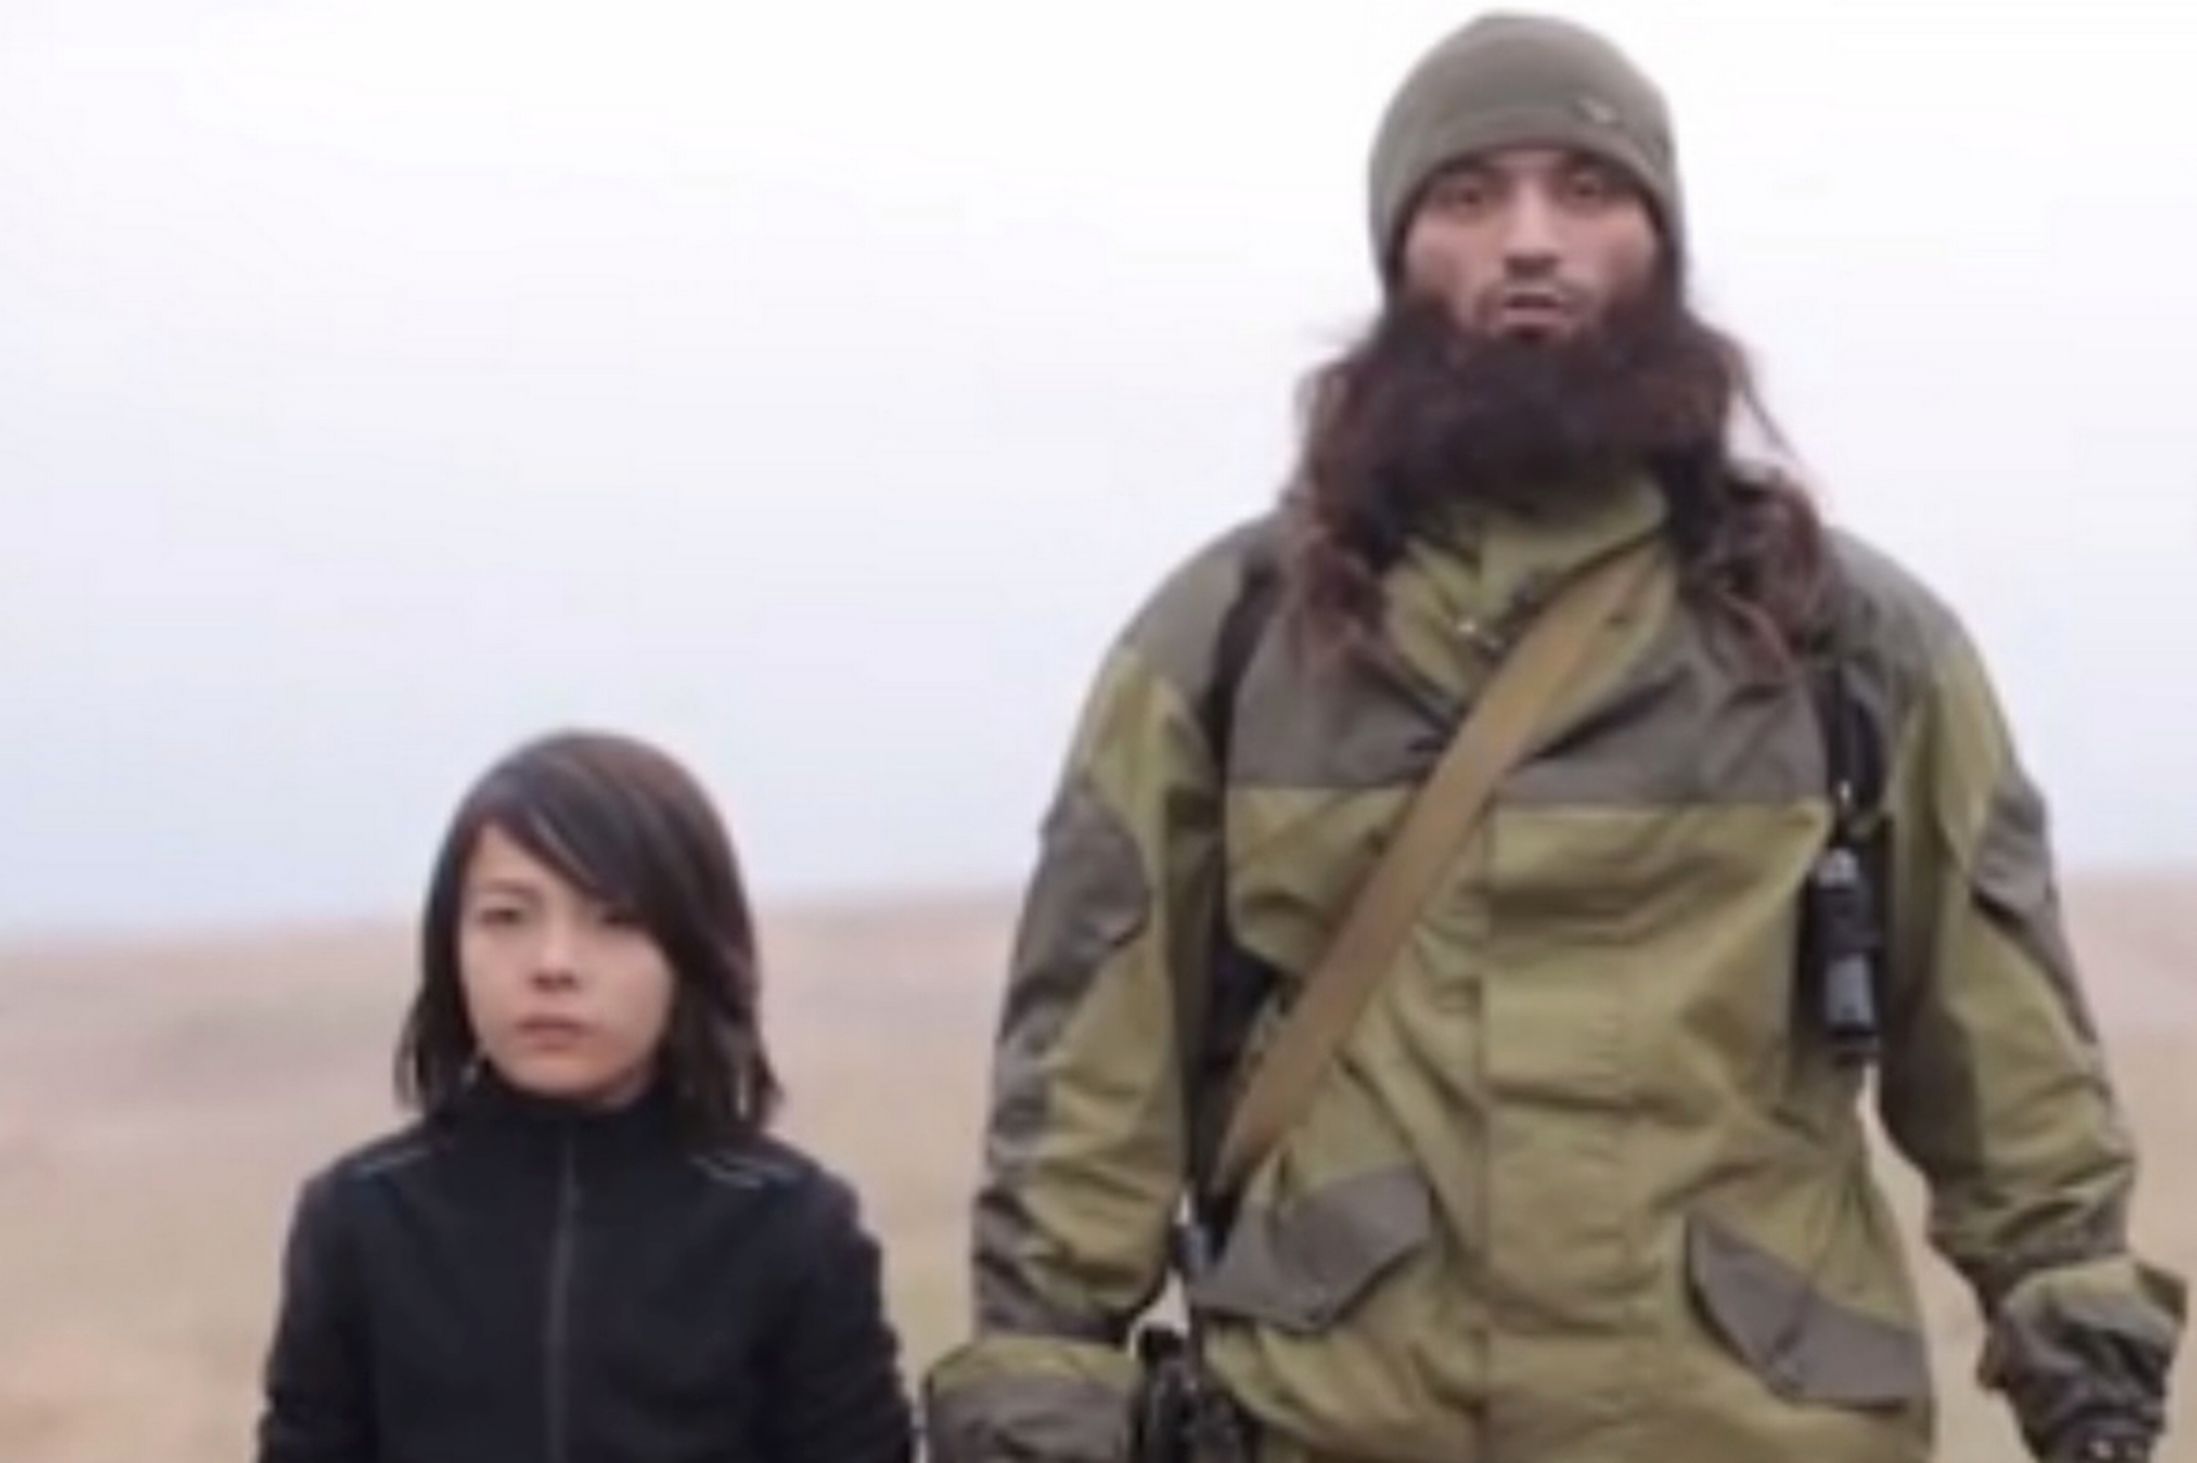 HORRIFIC NEW VIDEO: Young Boy Executes Two Men In Latest ISIS Propaganda Vi...